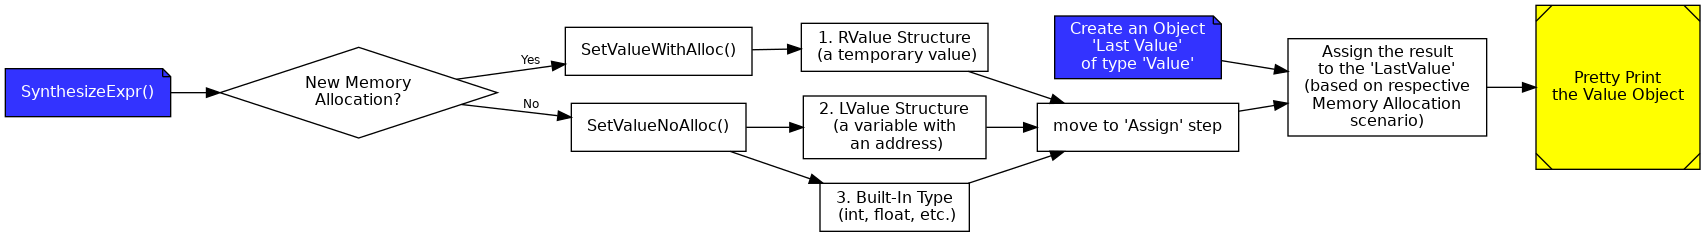 Shows how an object of type 'Value' is synthesized